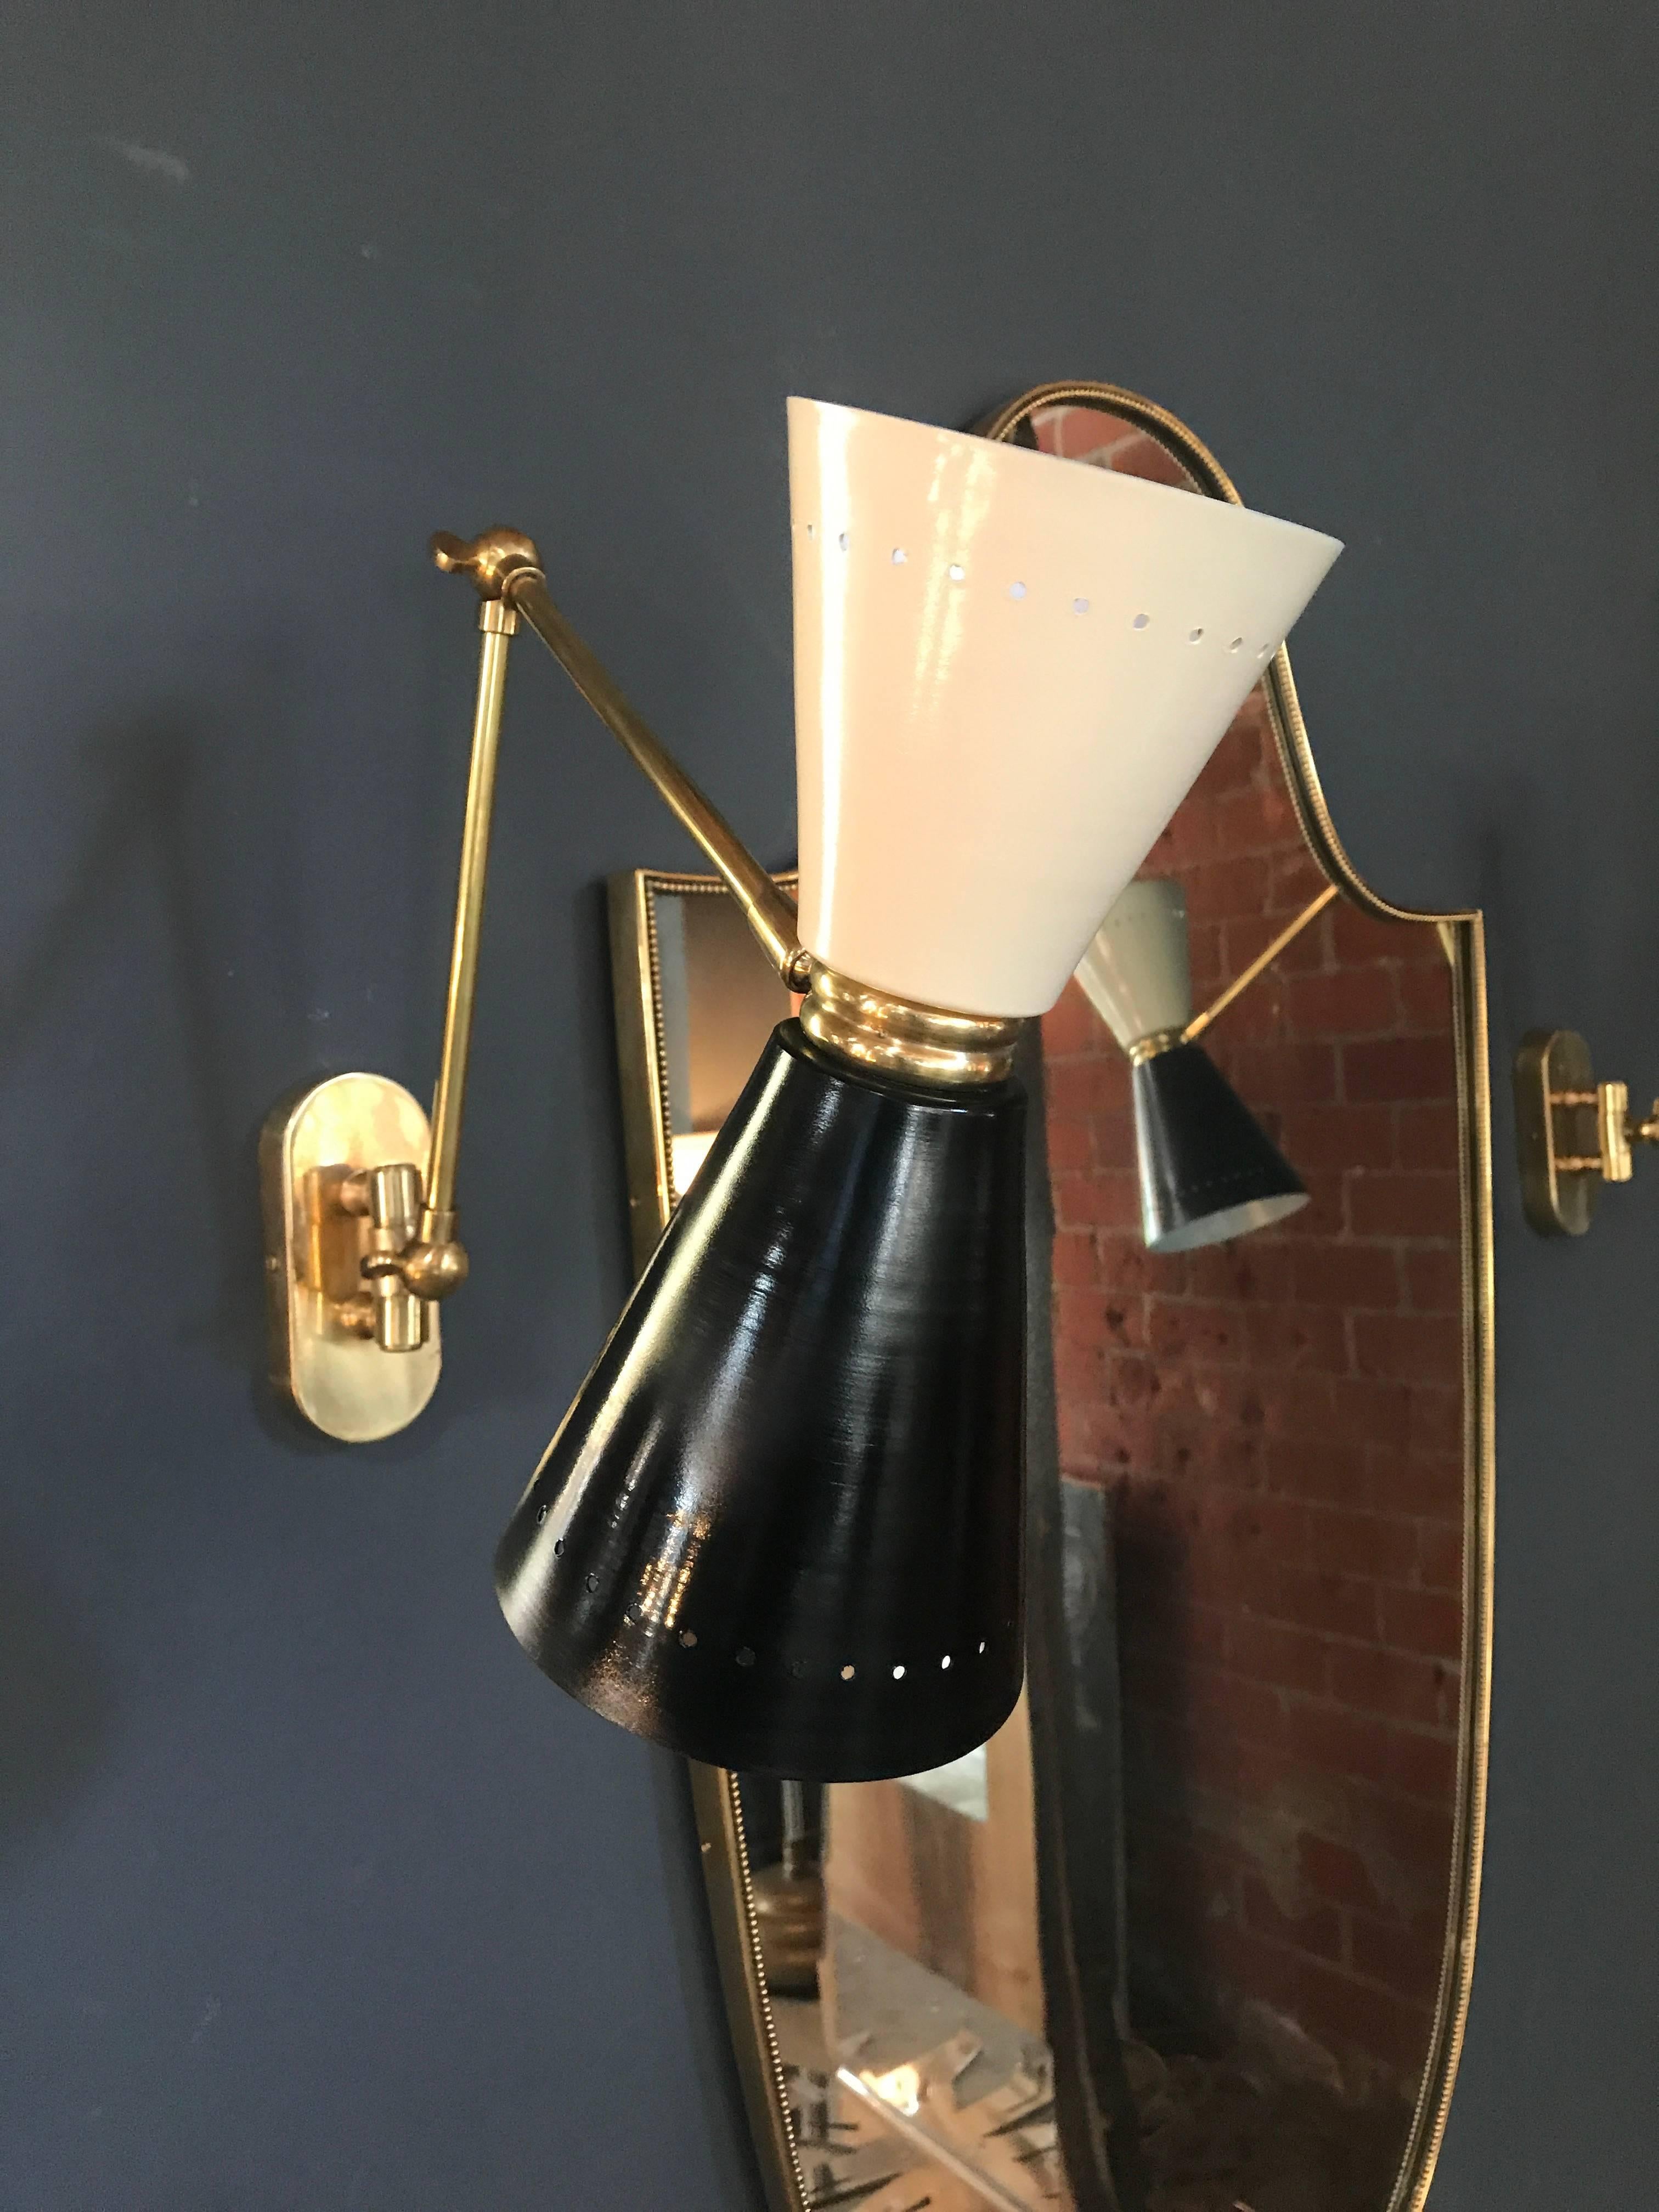 Italian two-tone lacquered sconces for reading or etc.